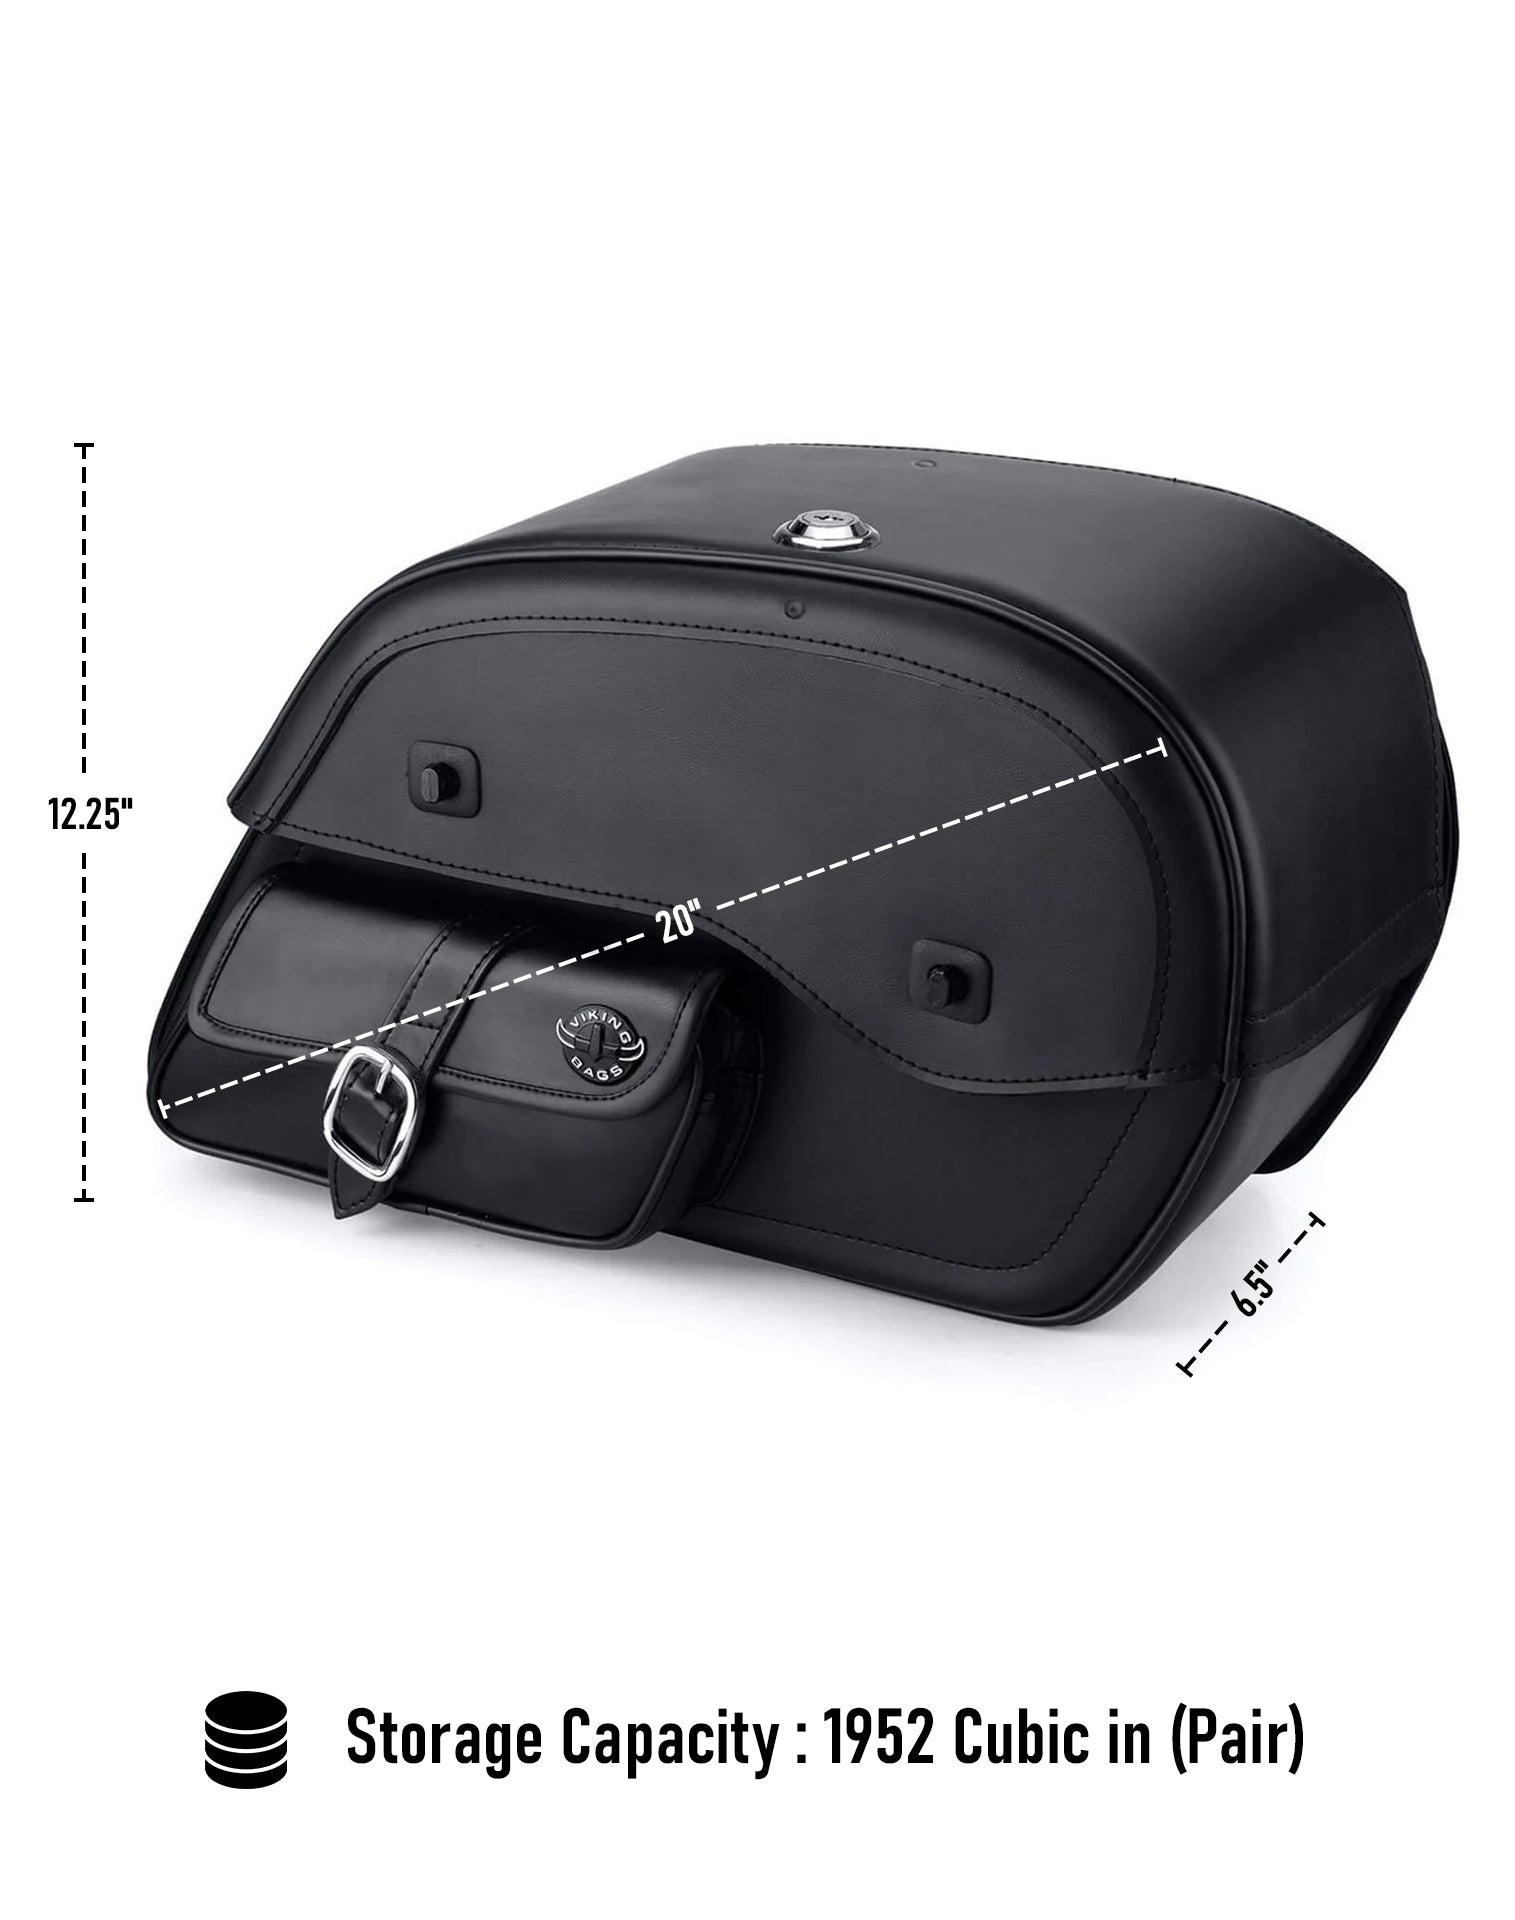 Viking Essential Side Pocket Large Yamaha V Star 1300 Tourer Leather Motorcycle Saddlebags Can Store Your Ridings Gears